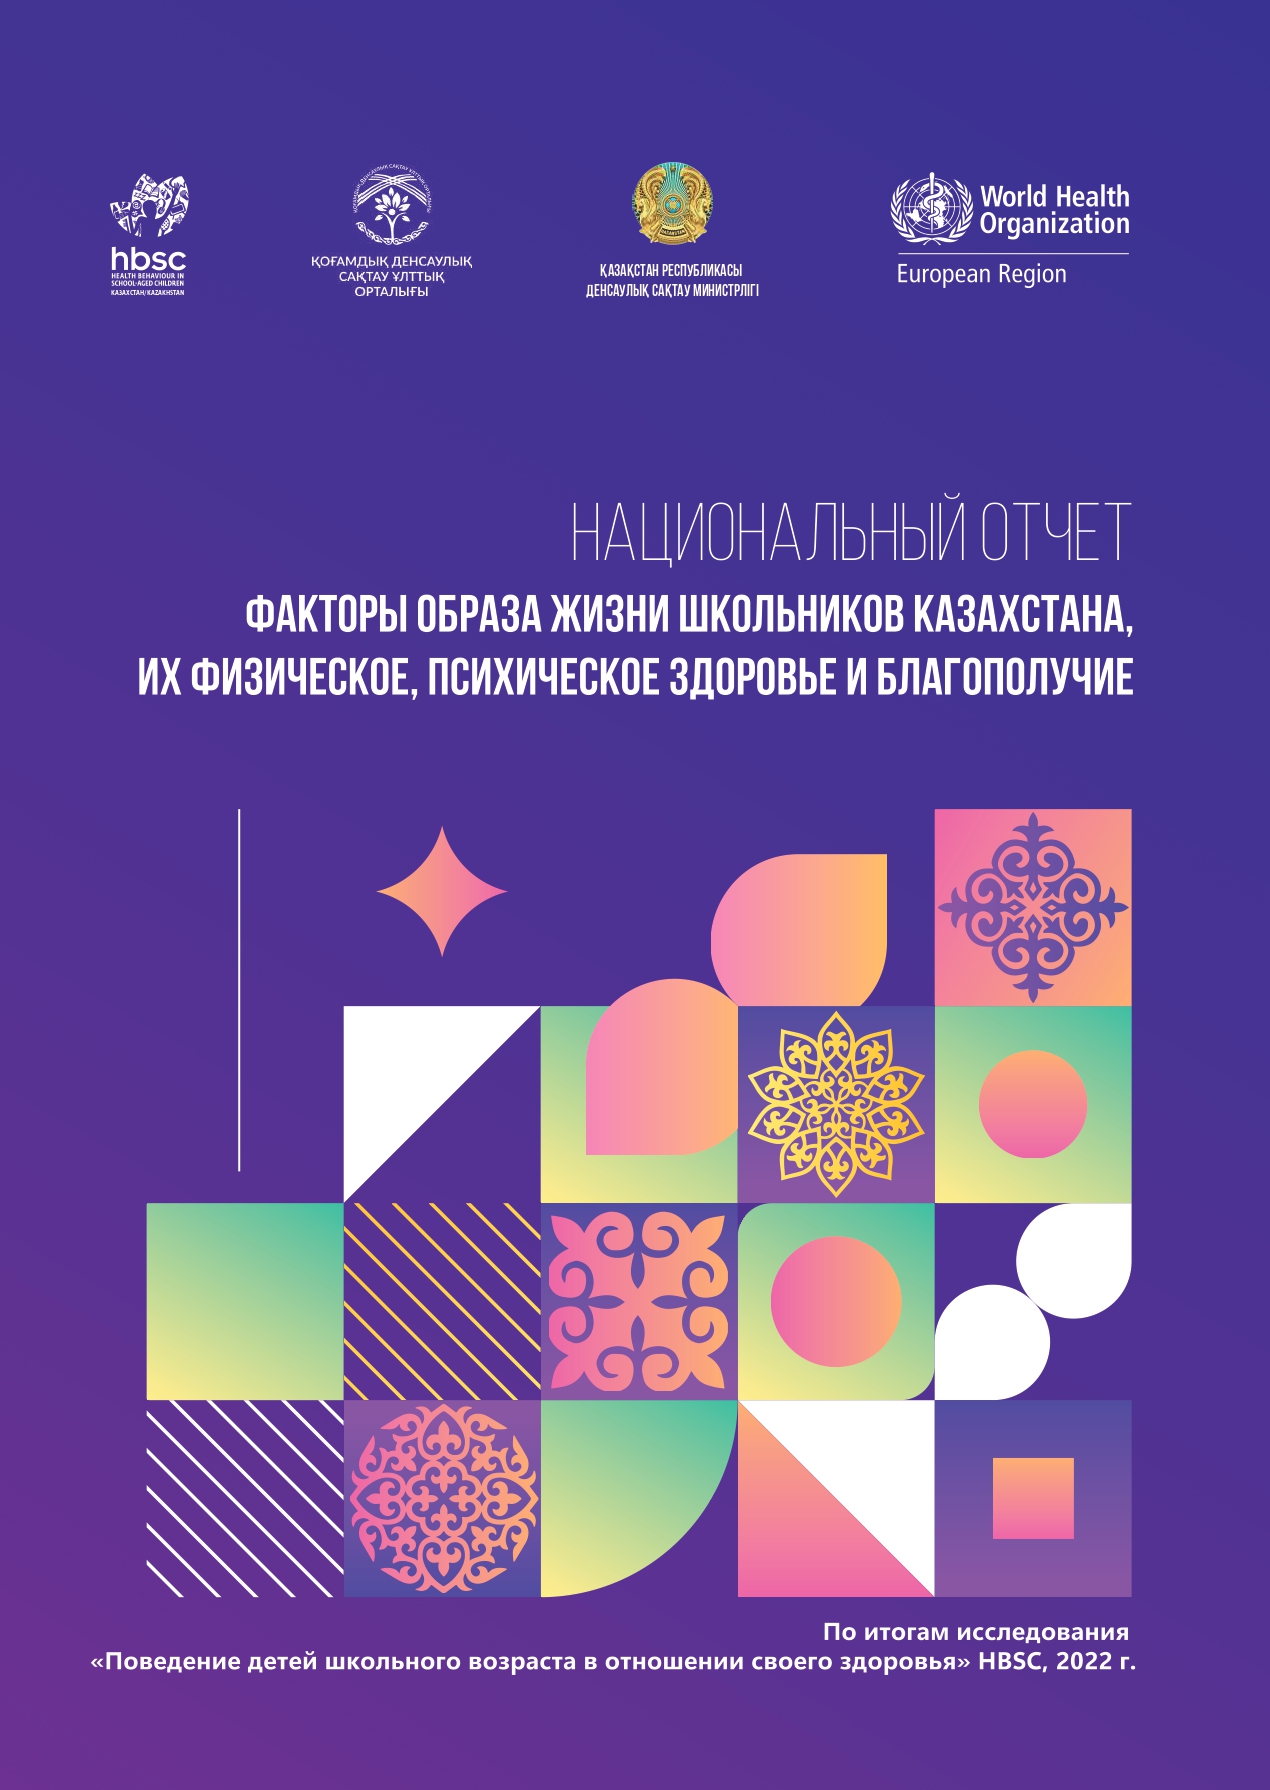 Front cover of HBSC Kazakhstan 2021-22 national report